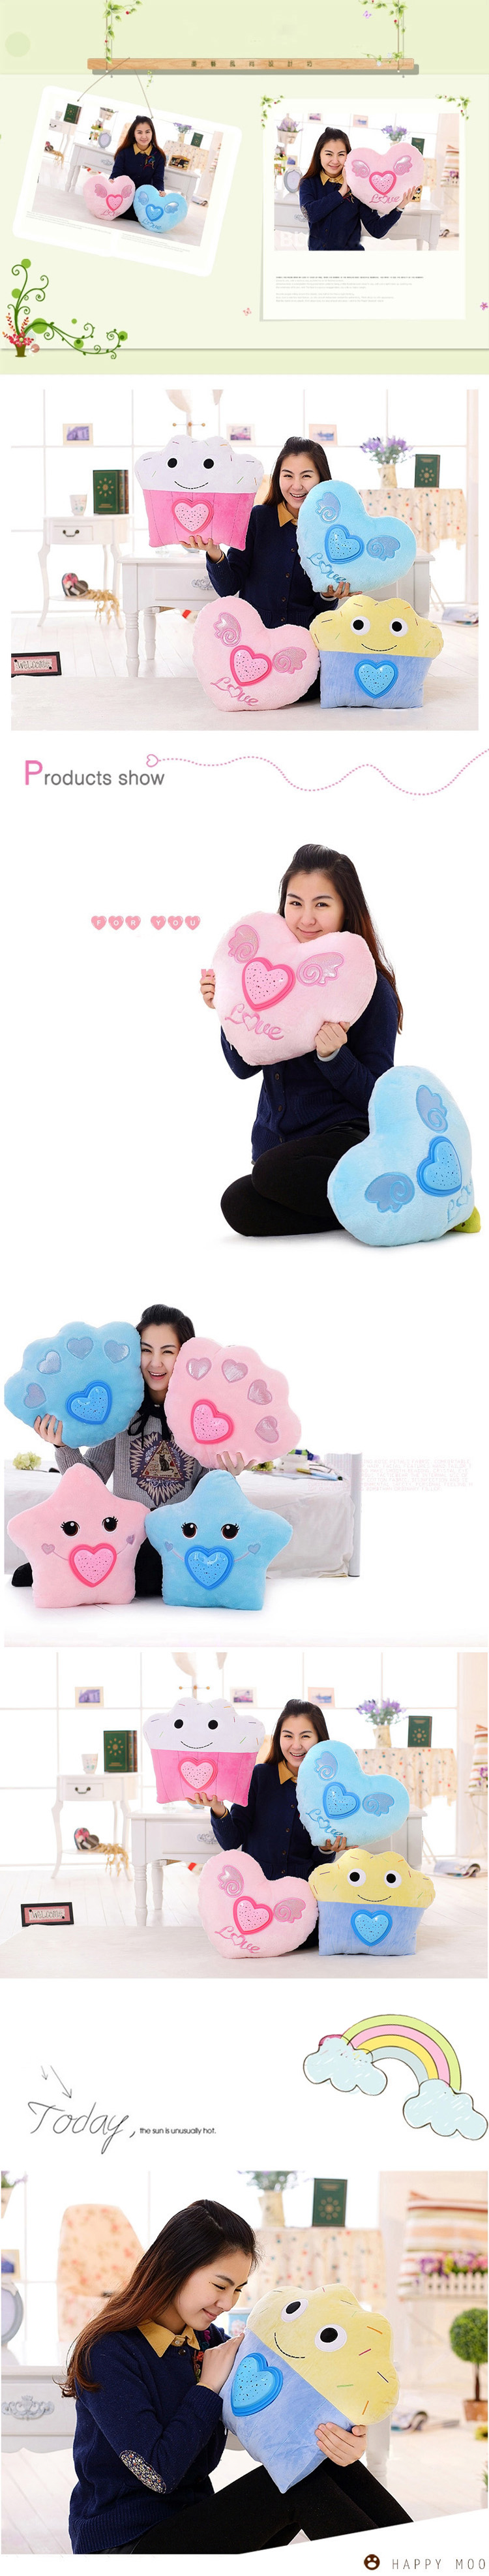 Colorful-Plush-LED-Music-Projection-Star-Cake-Heart-Shape-Throw-Pillow-Home-Sofa-Decor-Valentine-Gif-1023125-3